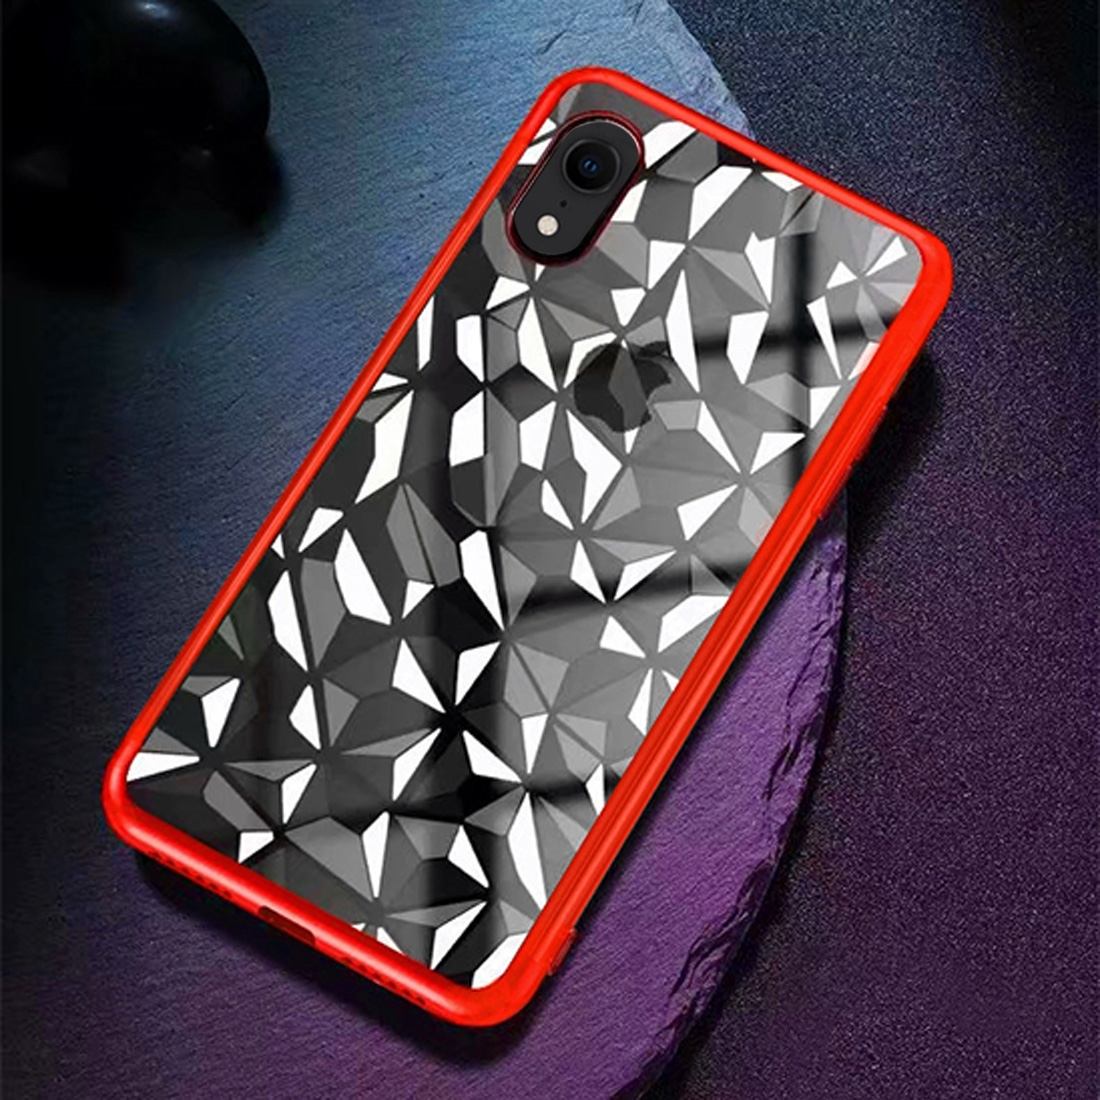 Diamond Texture Electroplating TPU Case For iPhone XR 6.1 inch,Red